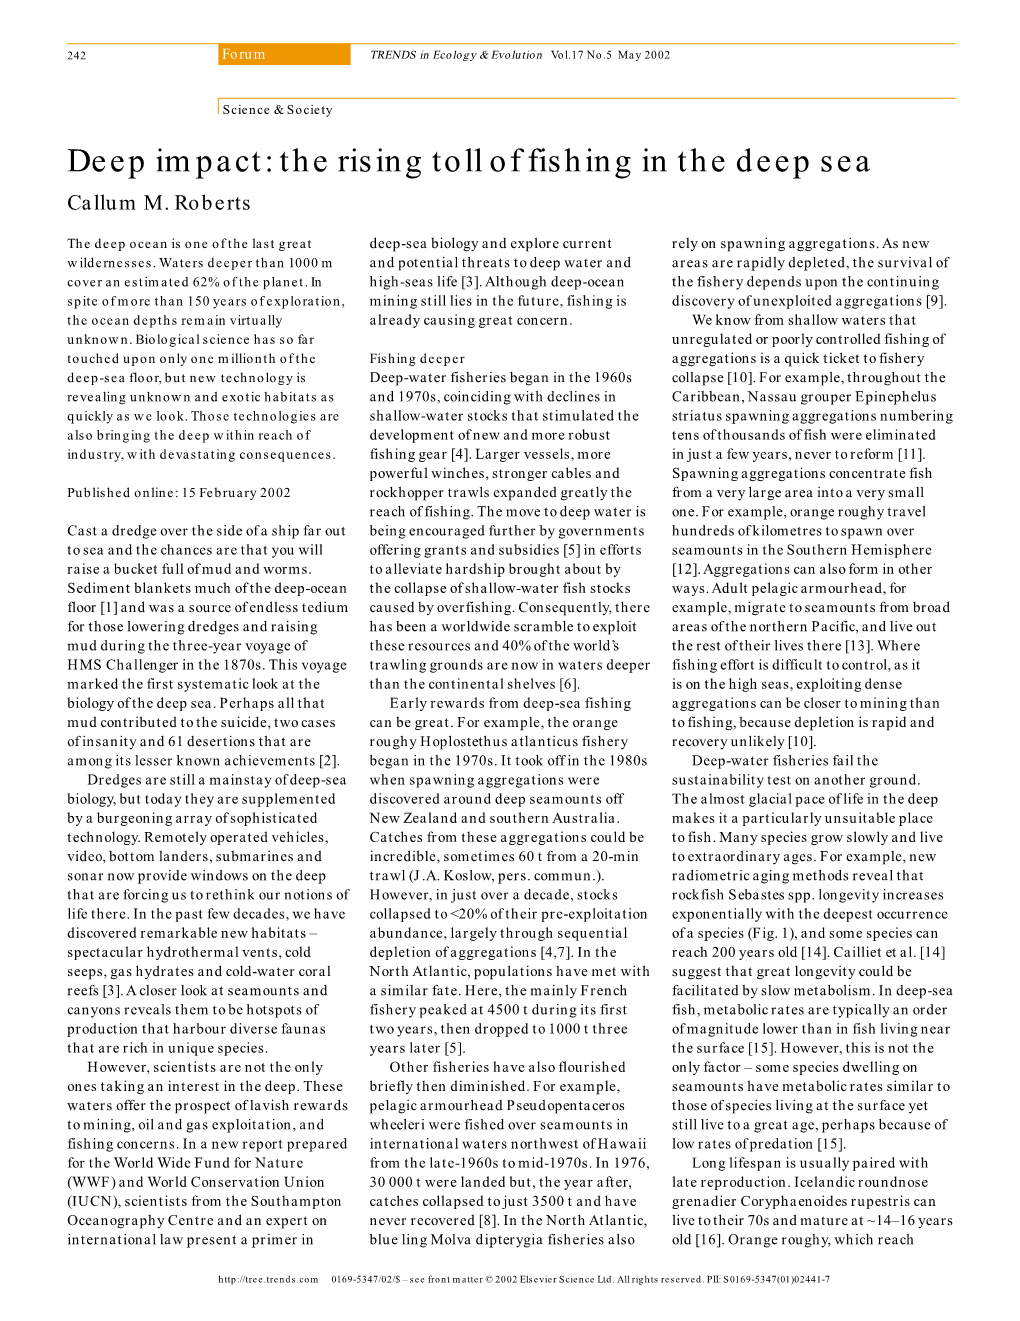 The Rising Toll of Fishing in the Deep Sea Callum M